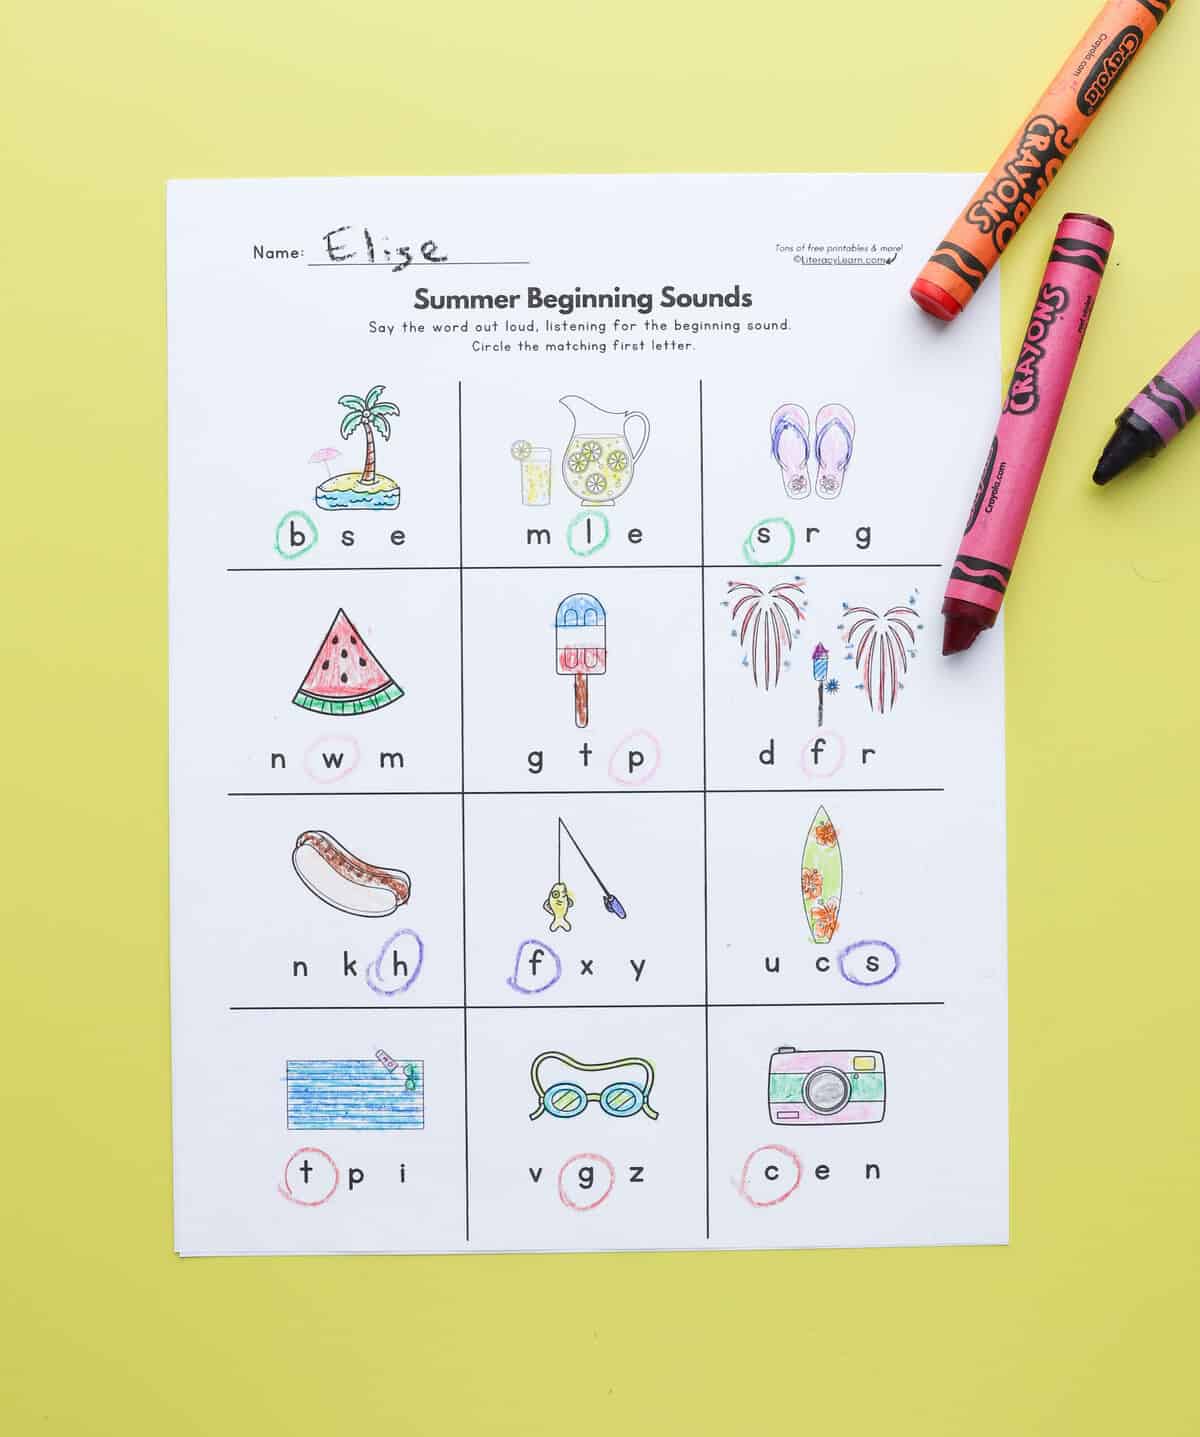 A printed summer-themed initial sounds worksheet on a yellow background.